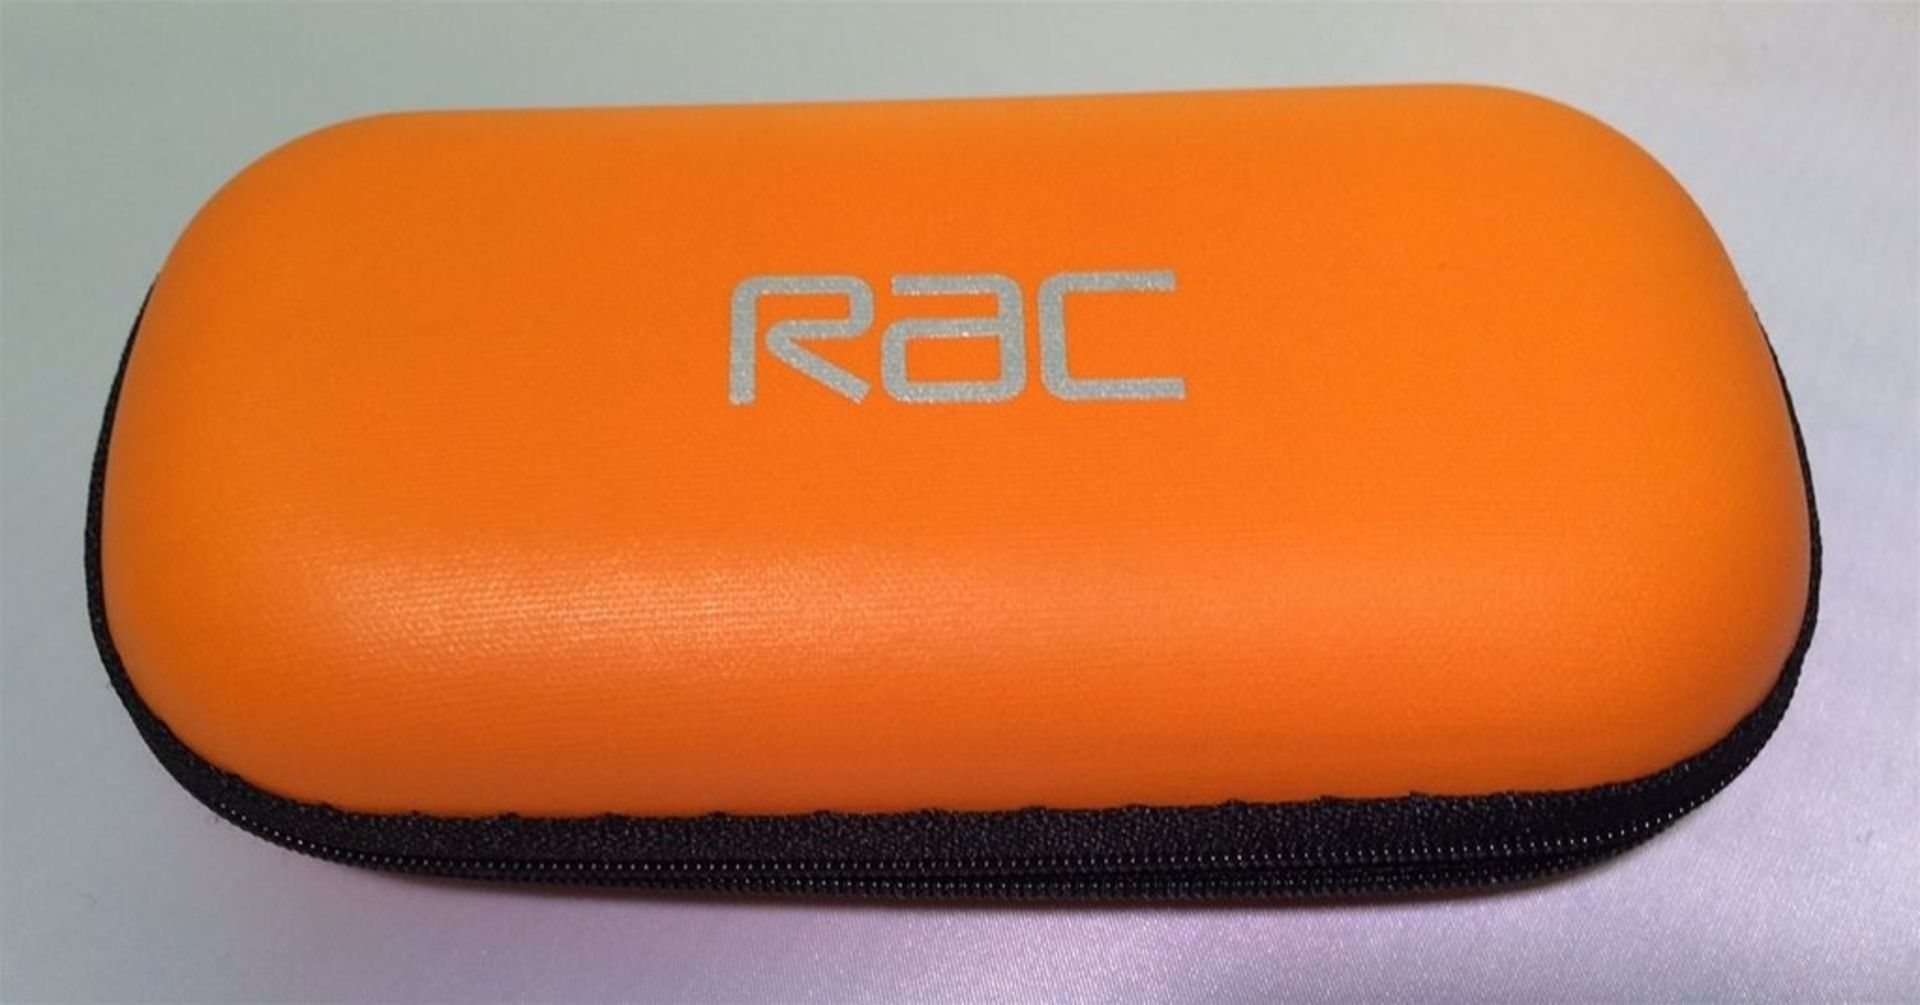 10 X Rac Aluminium Torch With 6 Extra Bright Led'S Inc Batteries And Case - Image 3 of 4